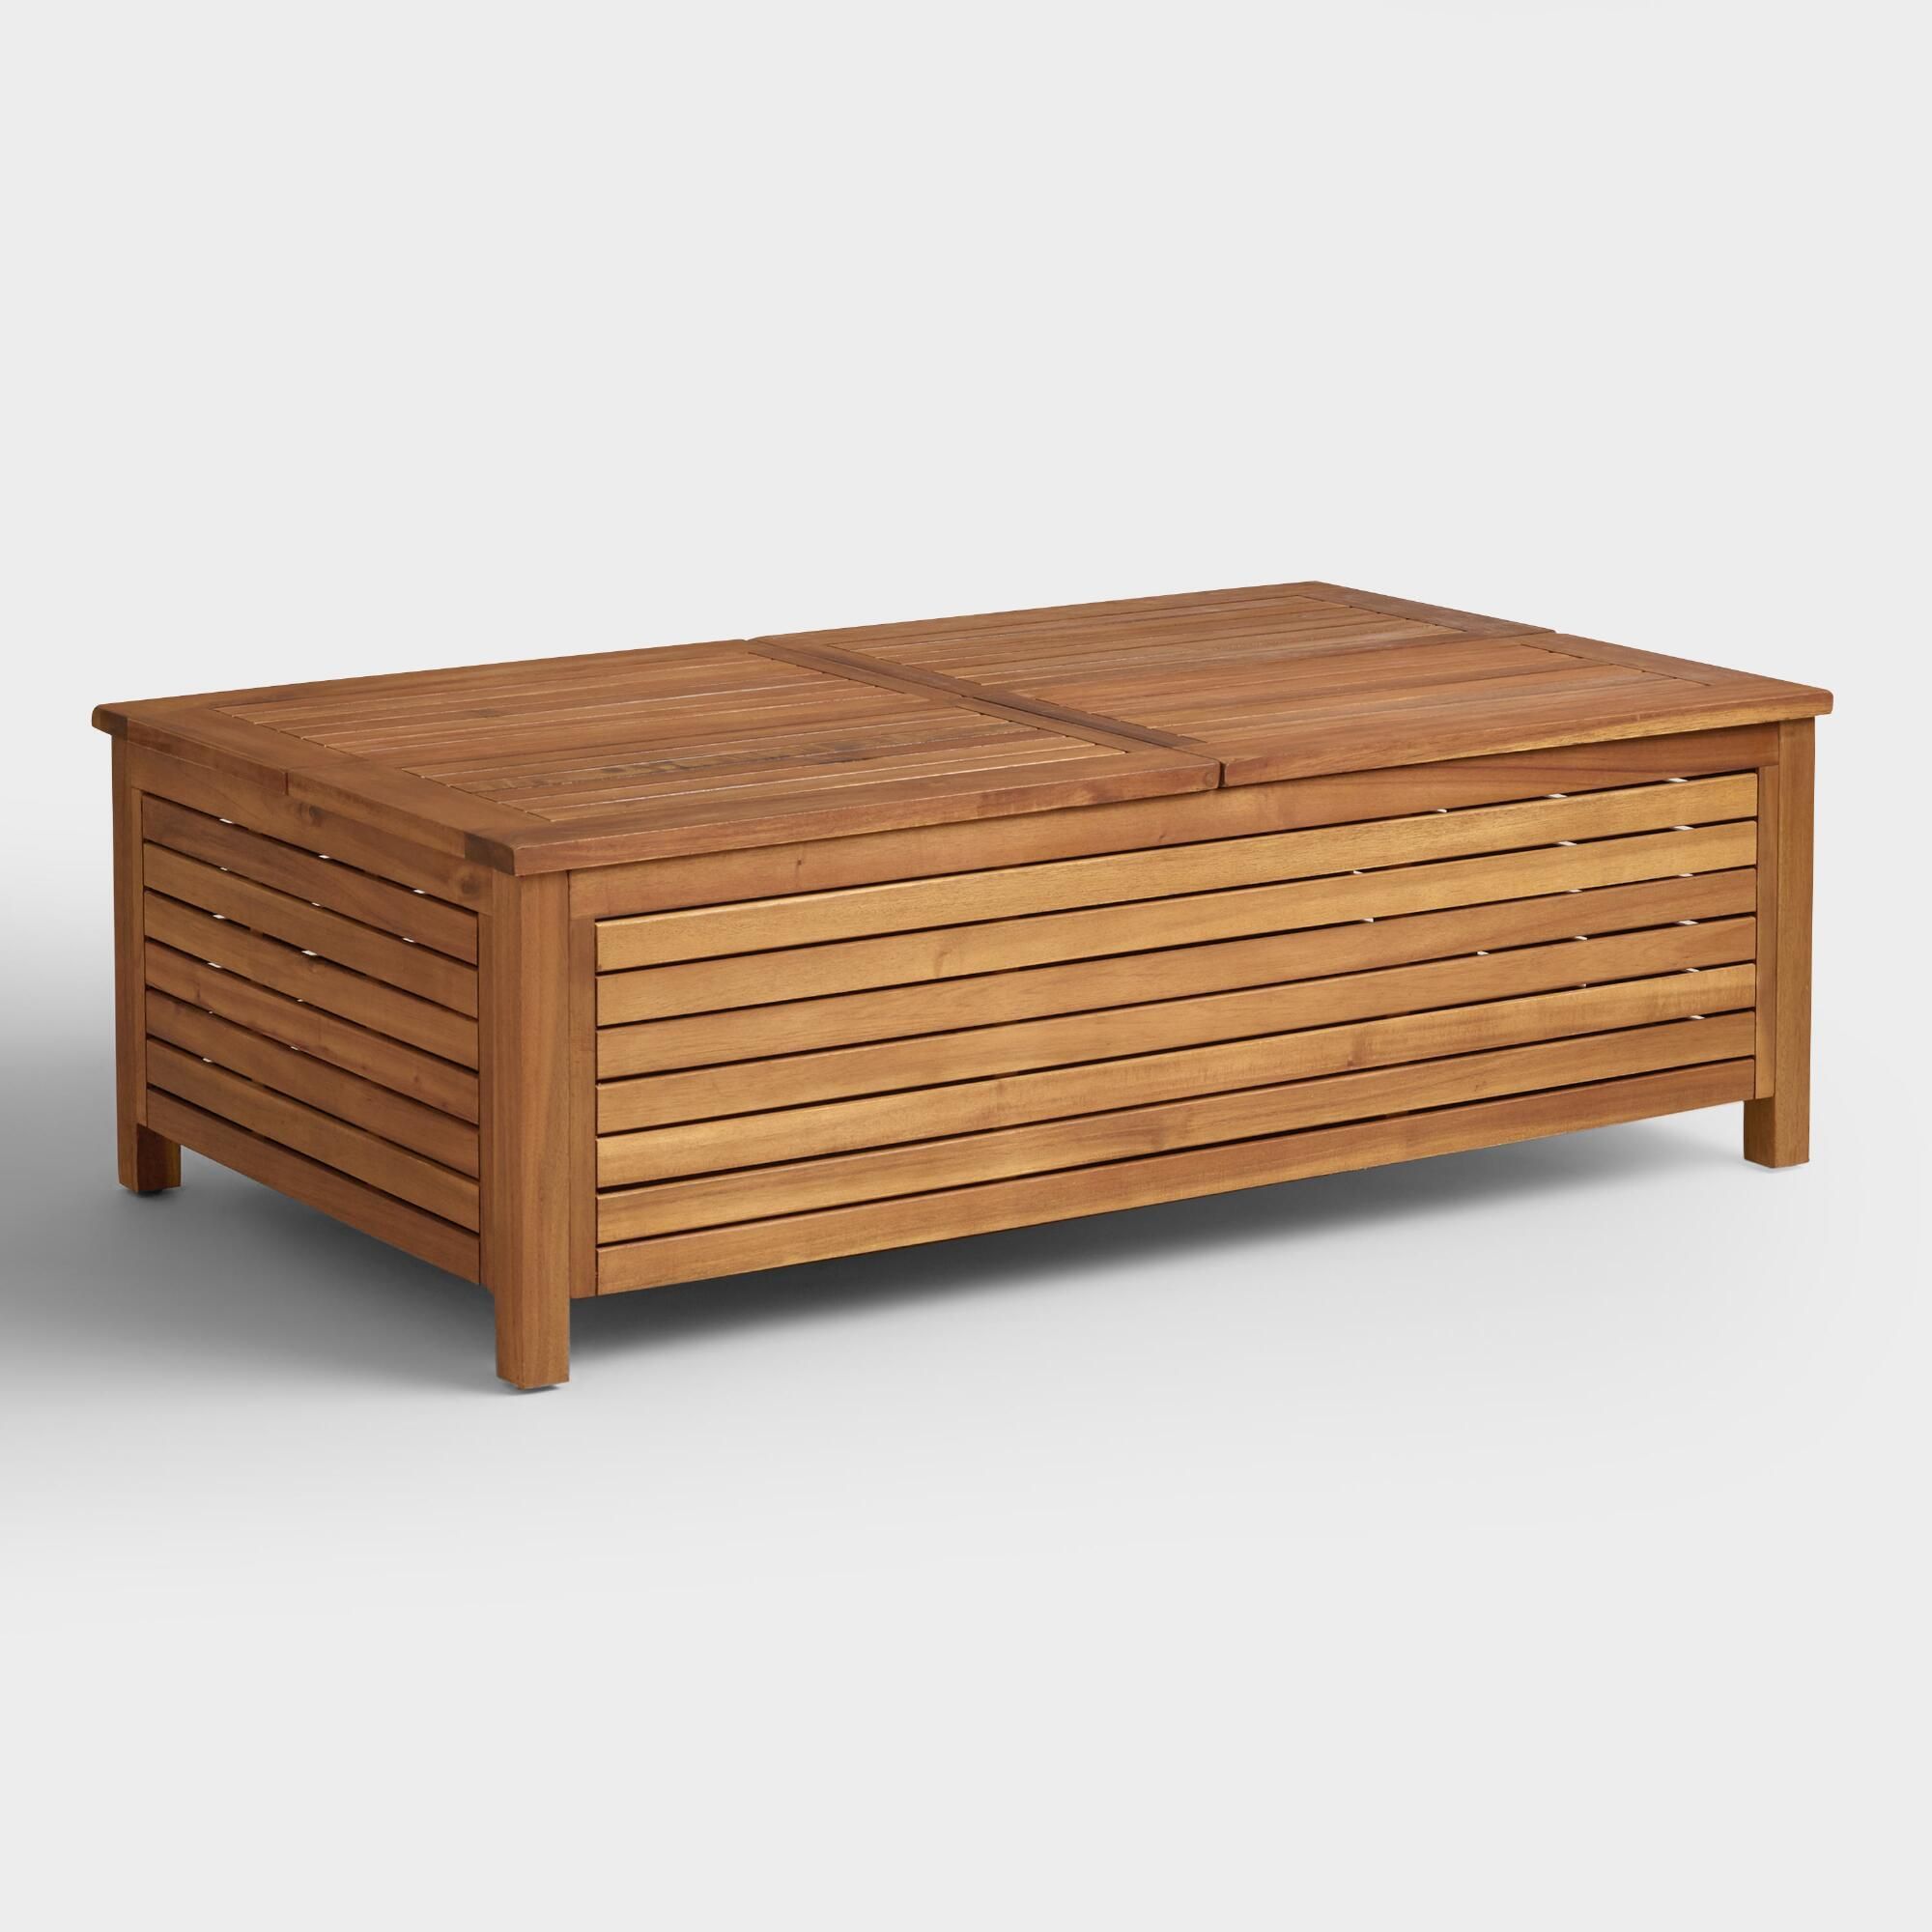 The Bold Beauty Of Our Occasional Collection Comes From Solid Acacia Regarding Outdoor Coffee Tables With Storage (View 7 of 15)